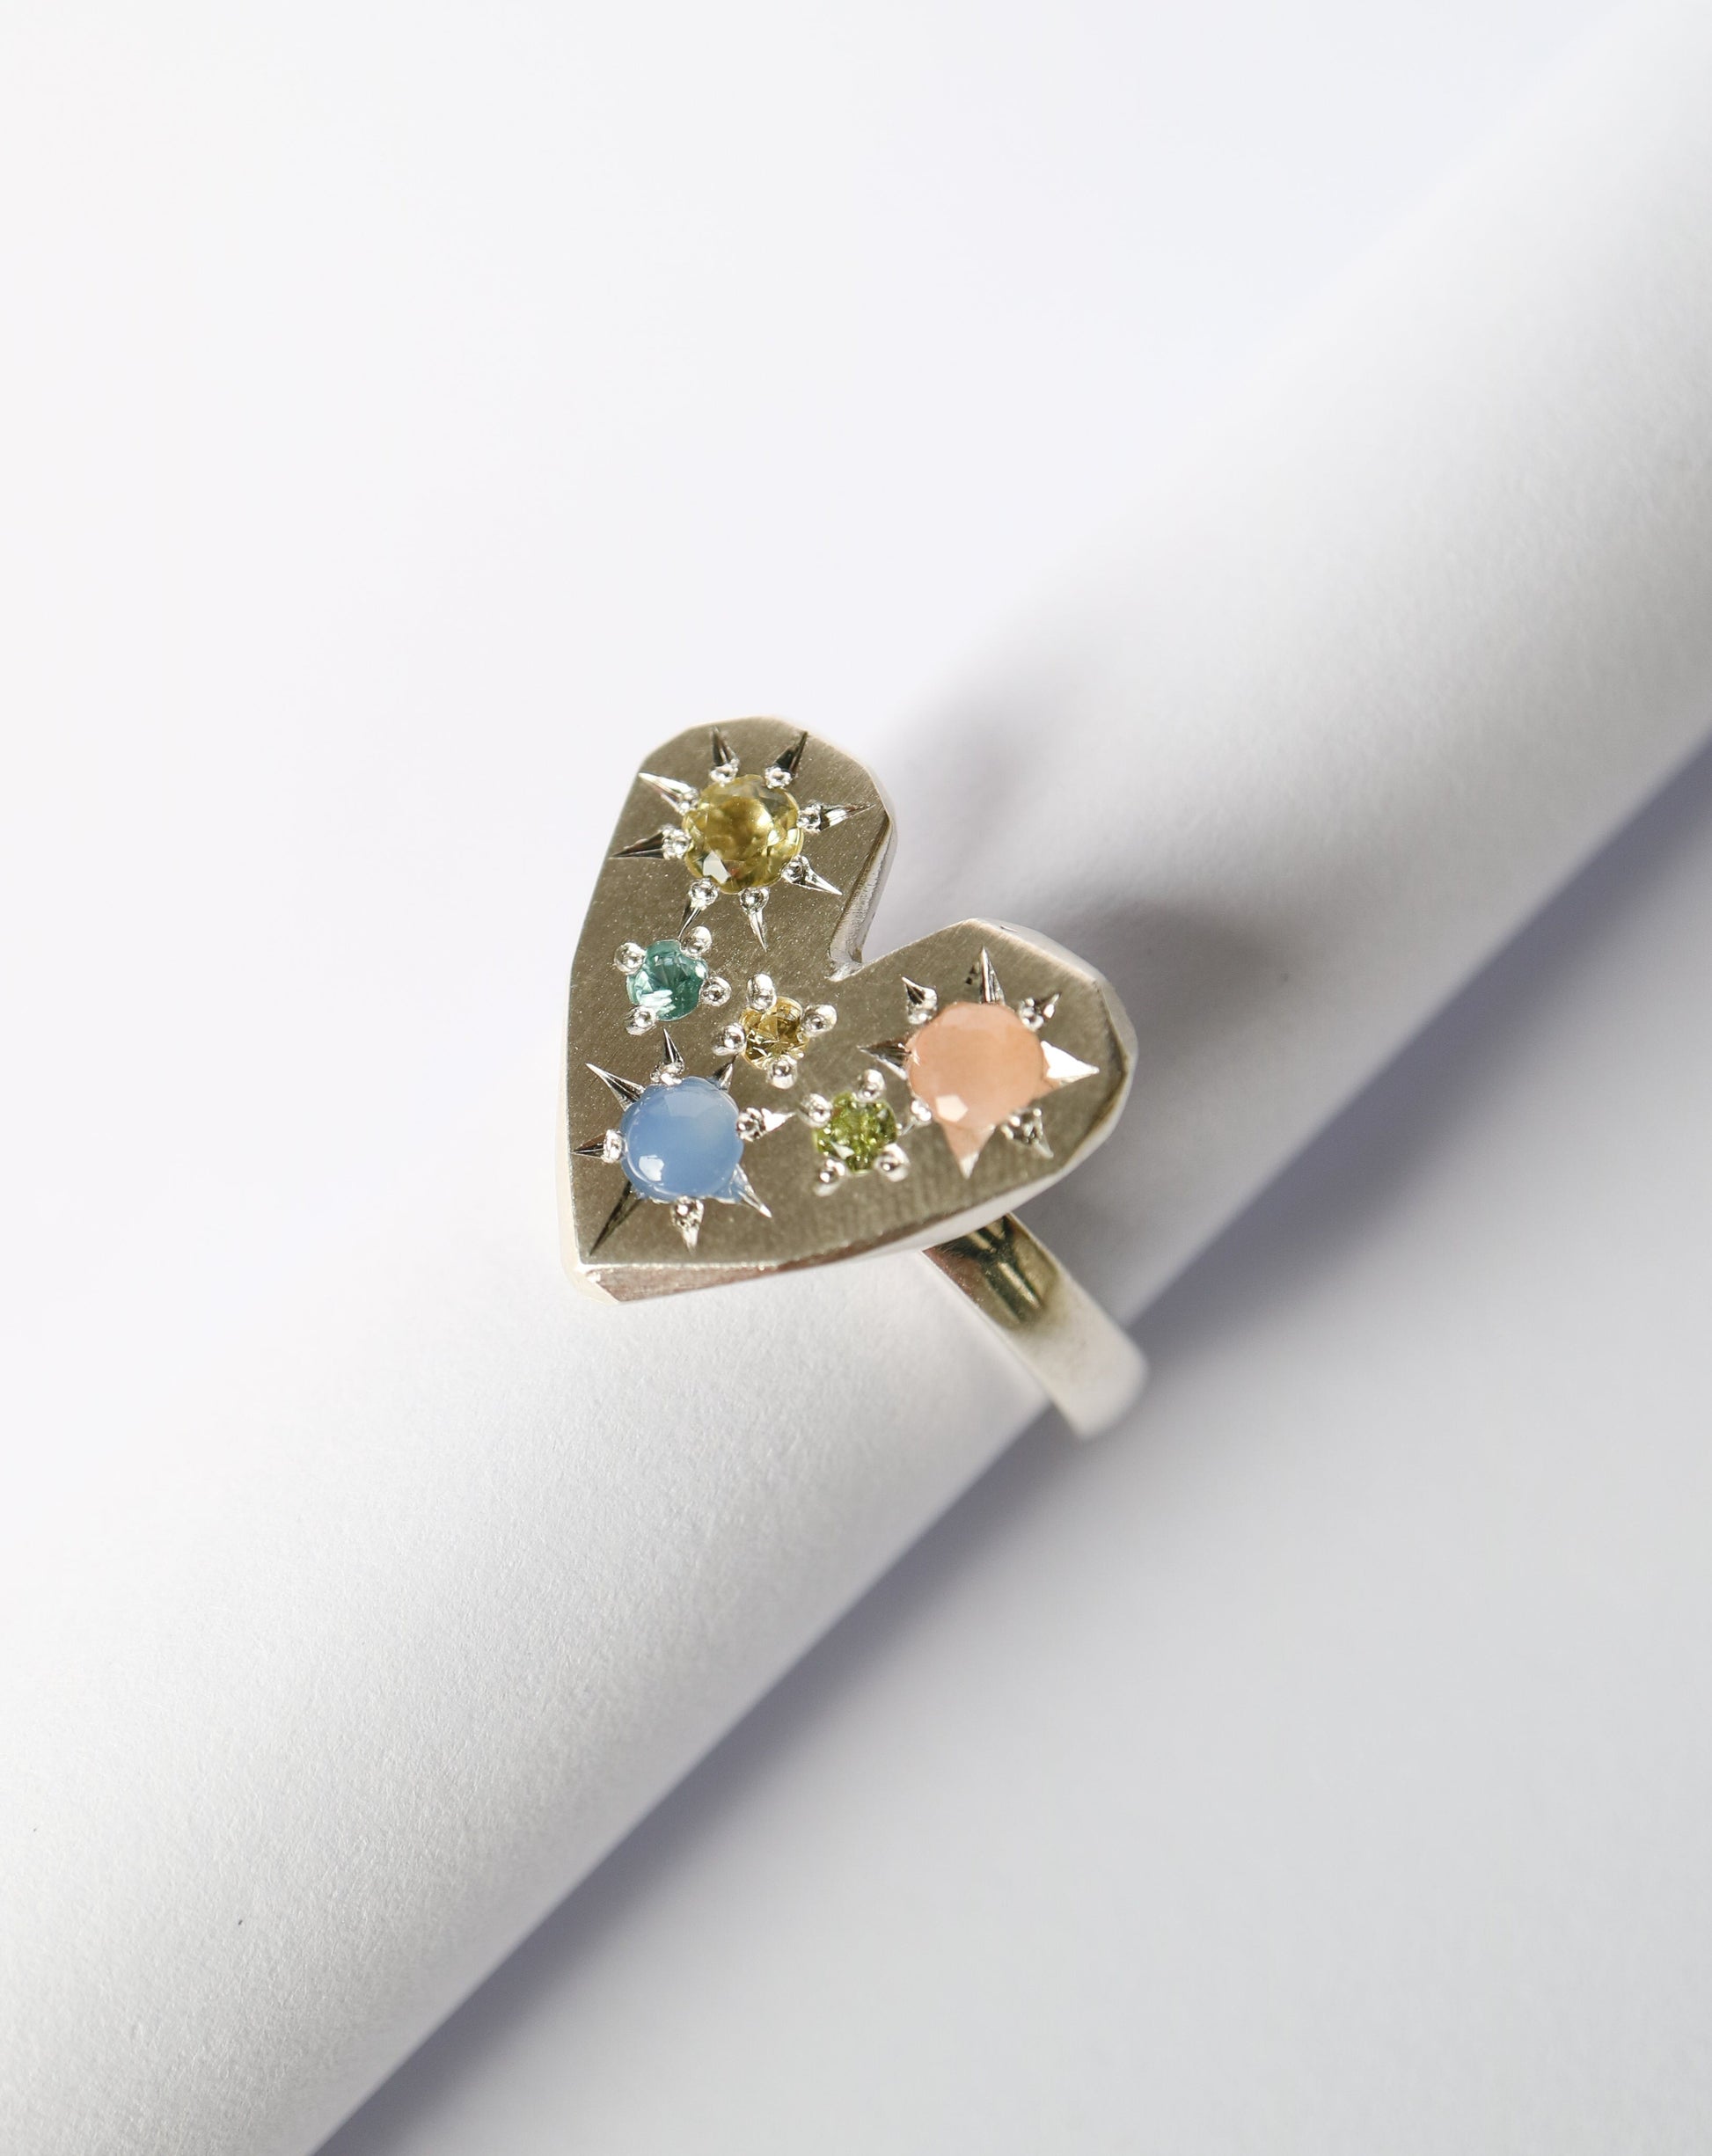 Zadie Remarco Silver Heart Ring with gemstones